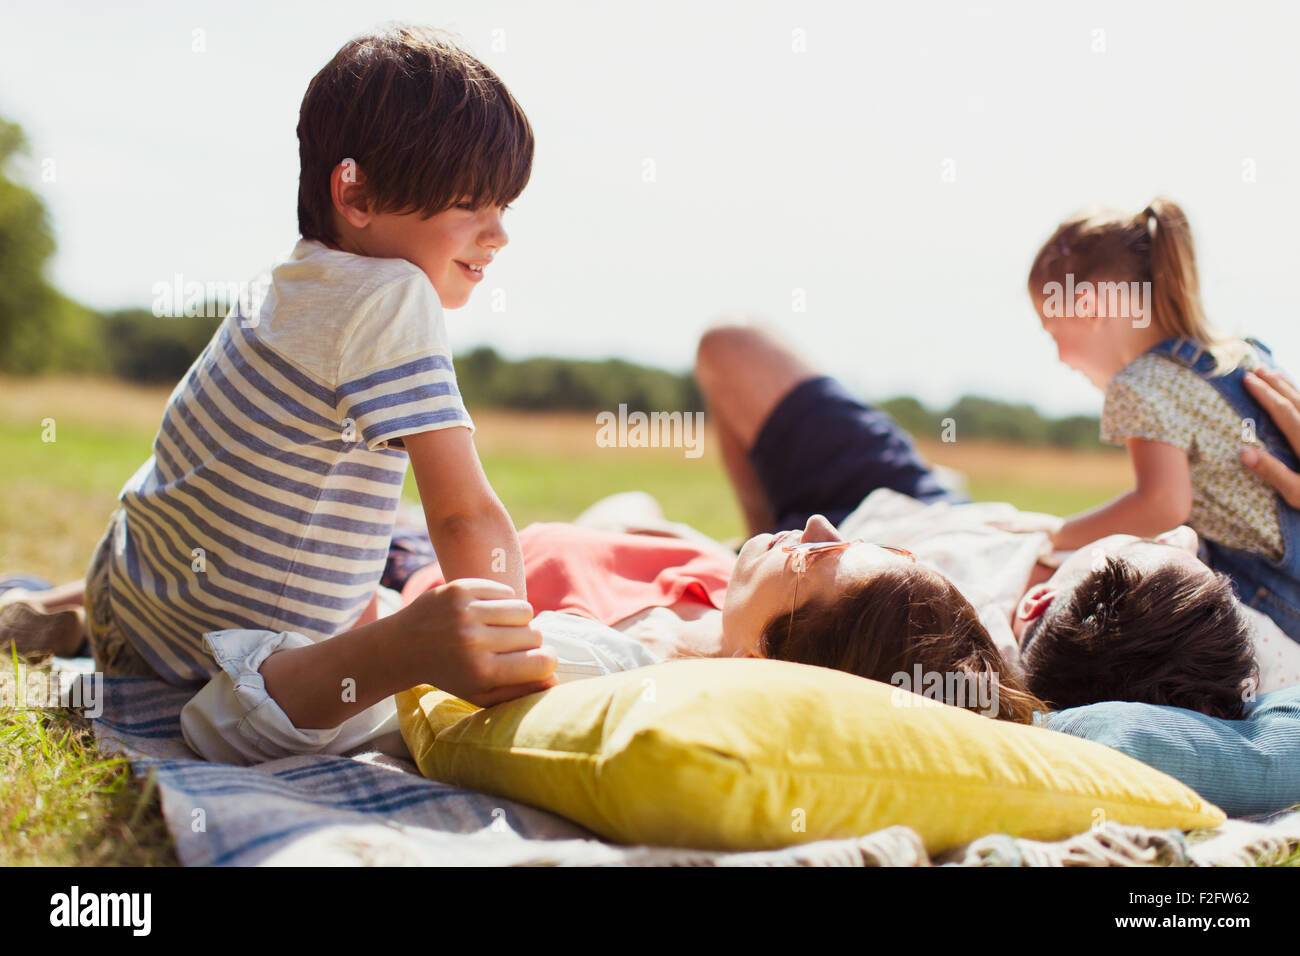 Family relaxing on blanket in sunny field Stock Photo